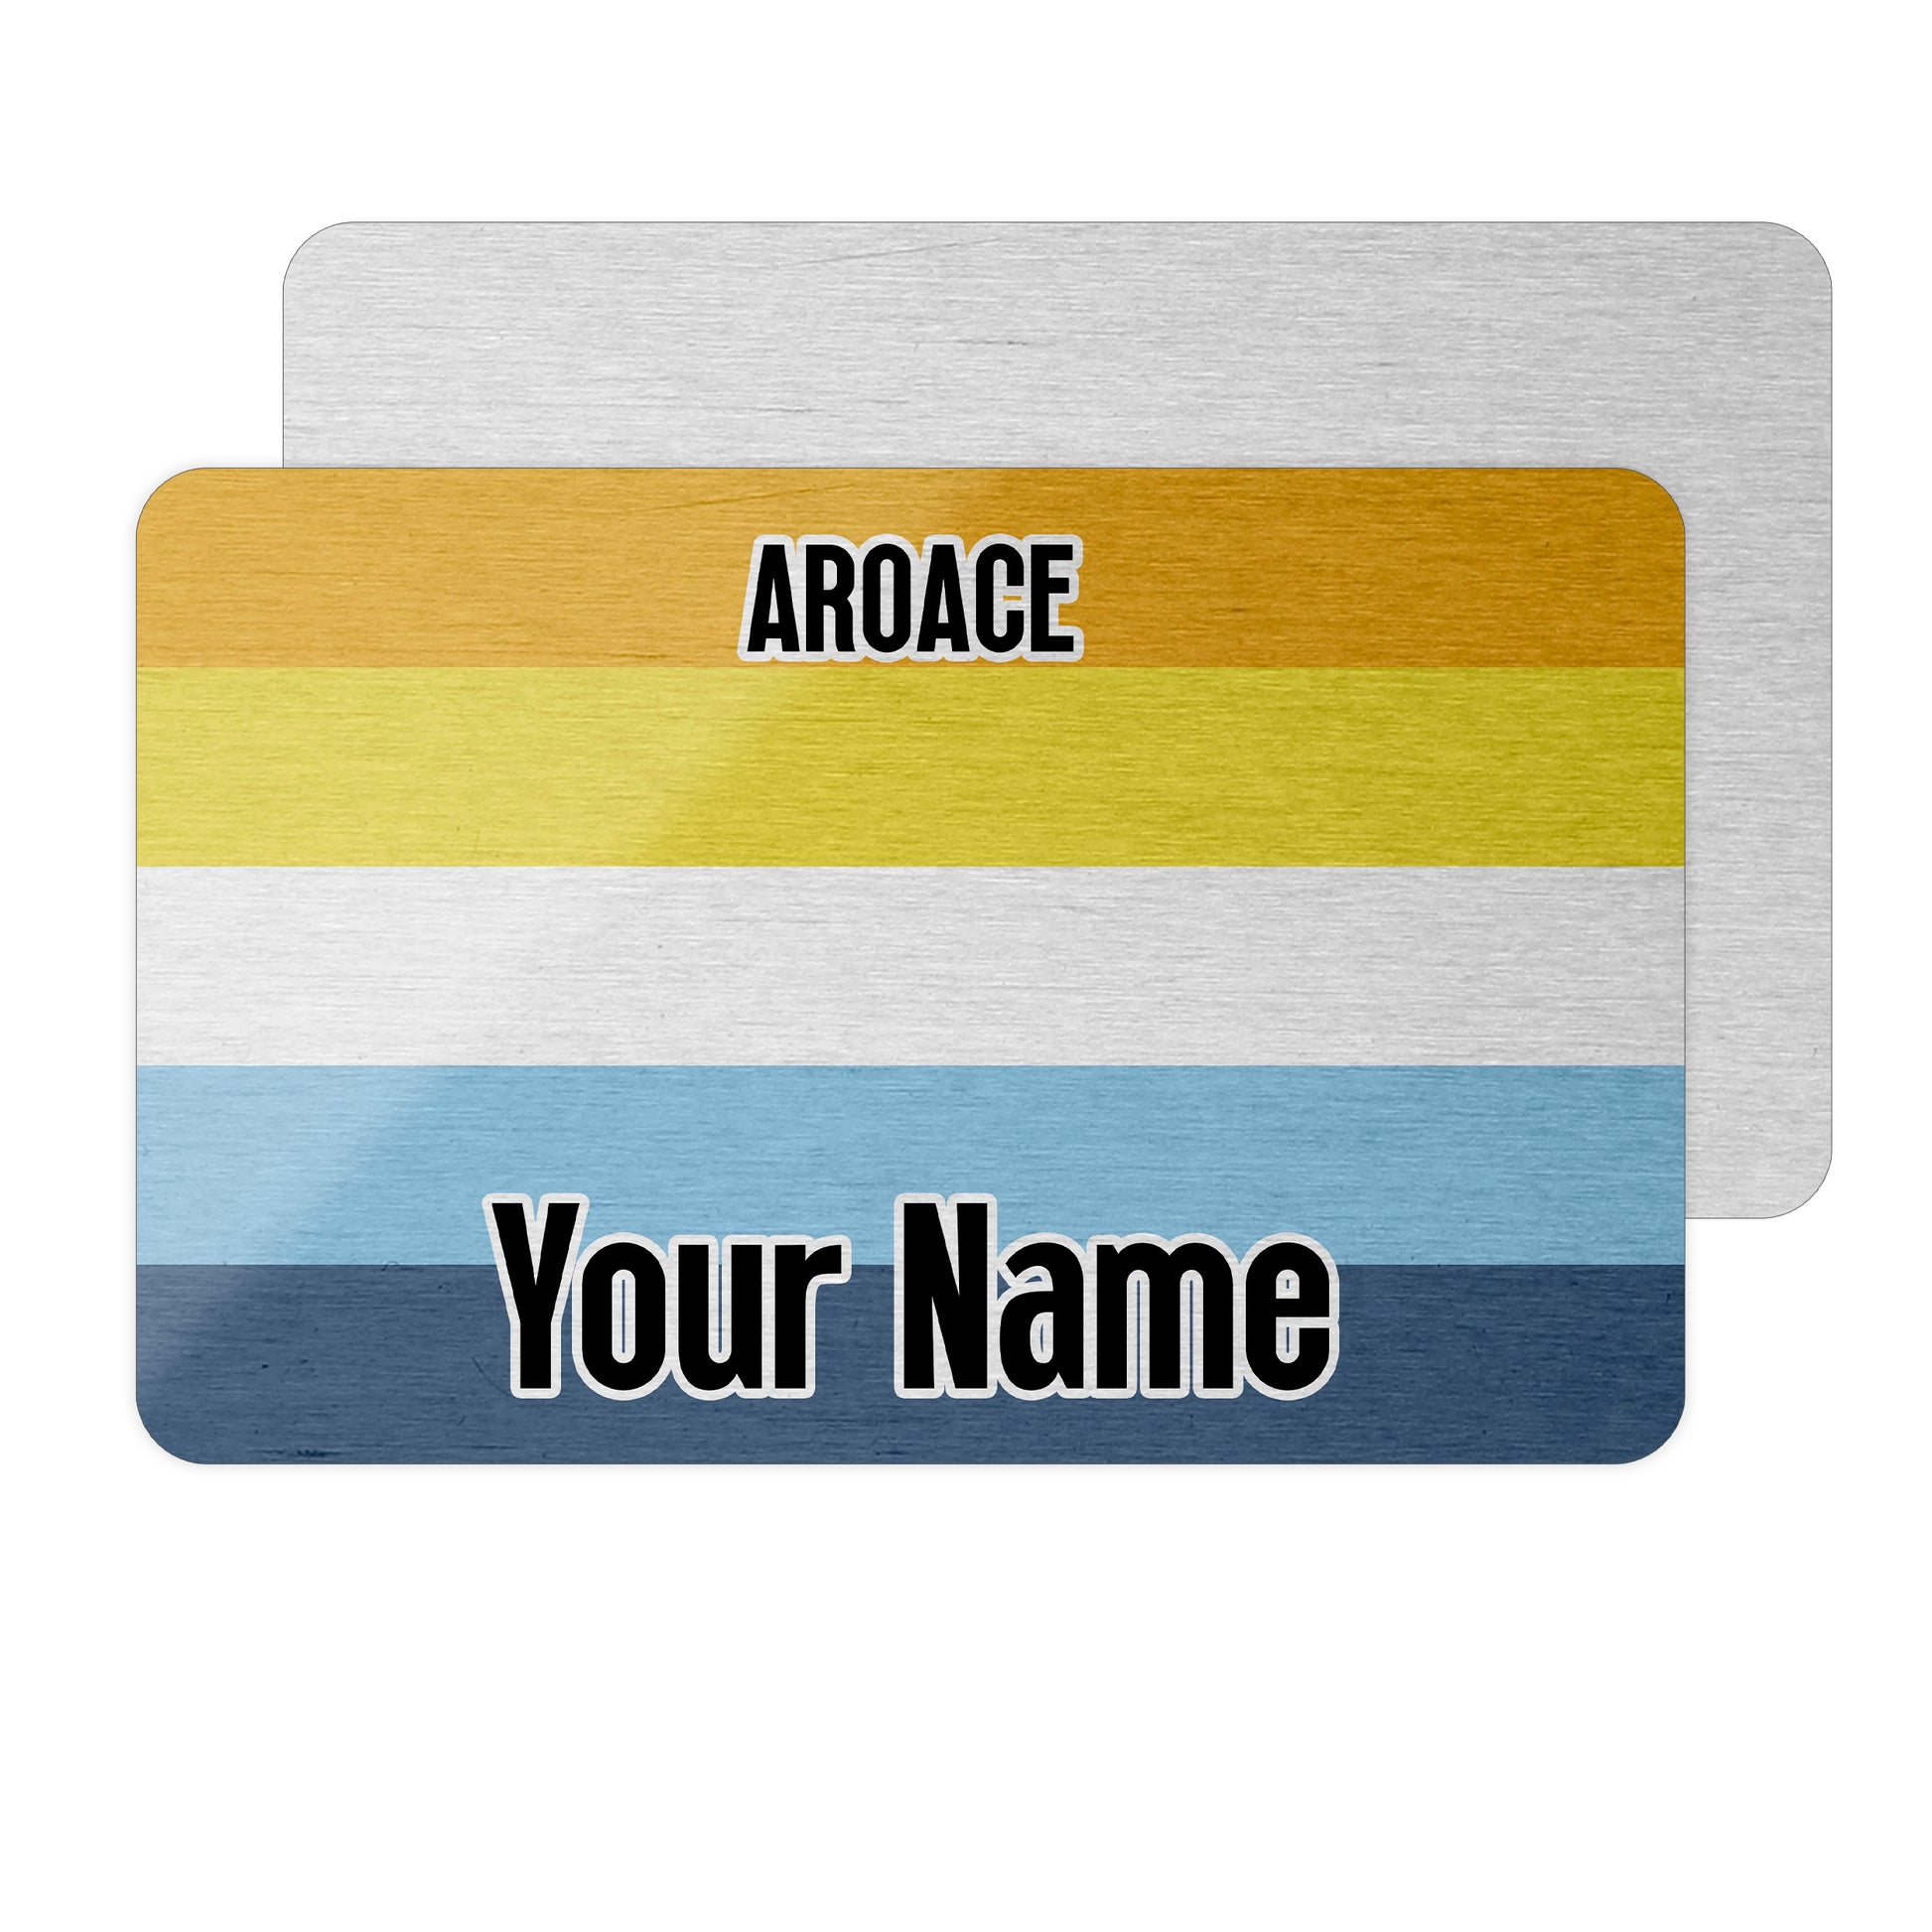 Aluminium metal novelty wallet card personalised with your name and the Aroace pride flag